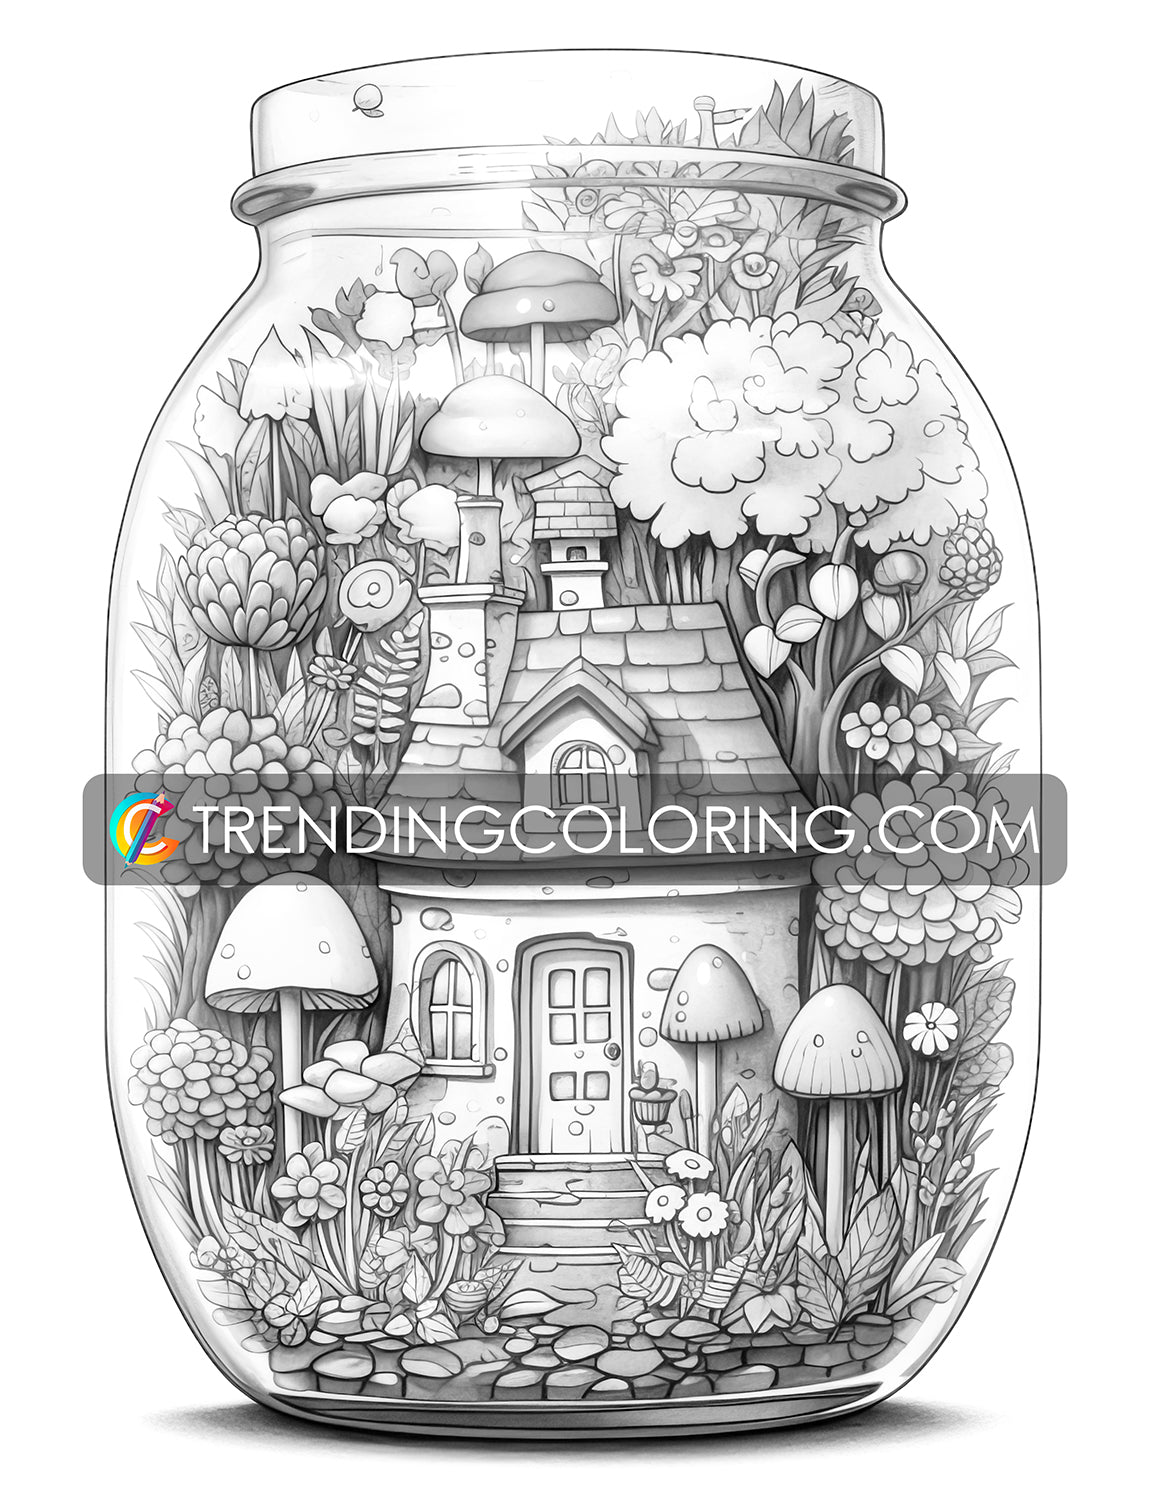 25 Peaceful Life In Jar Grayscale Coloring Pages - Instant Download - Printable PDF Dark/Light